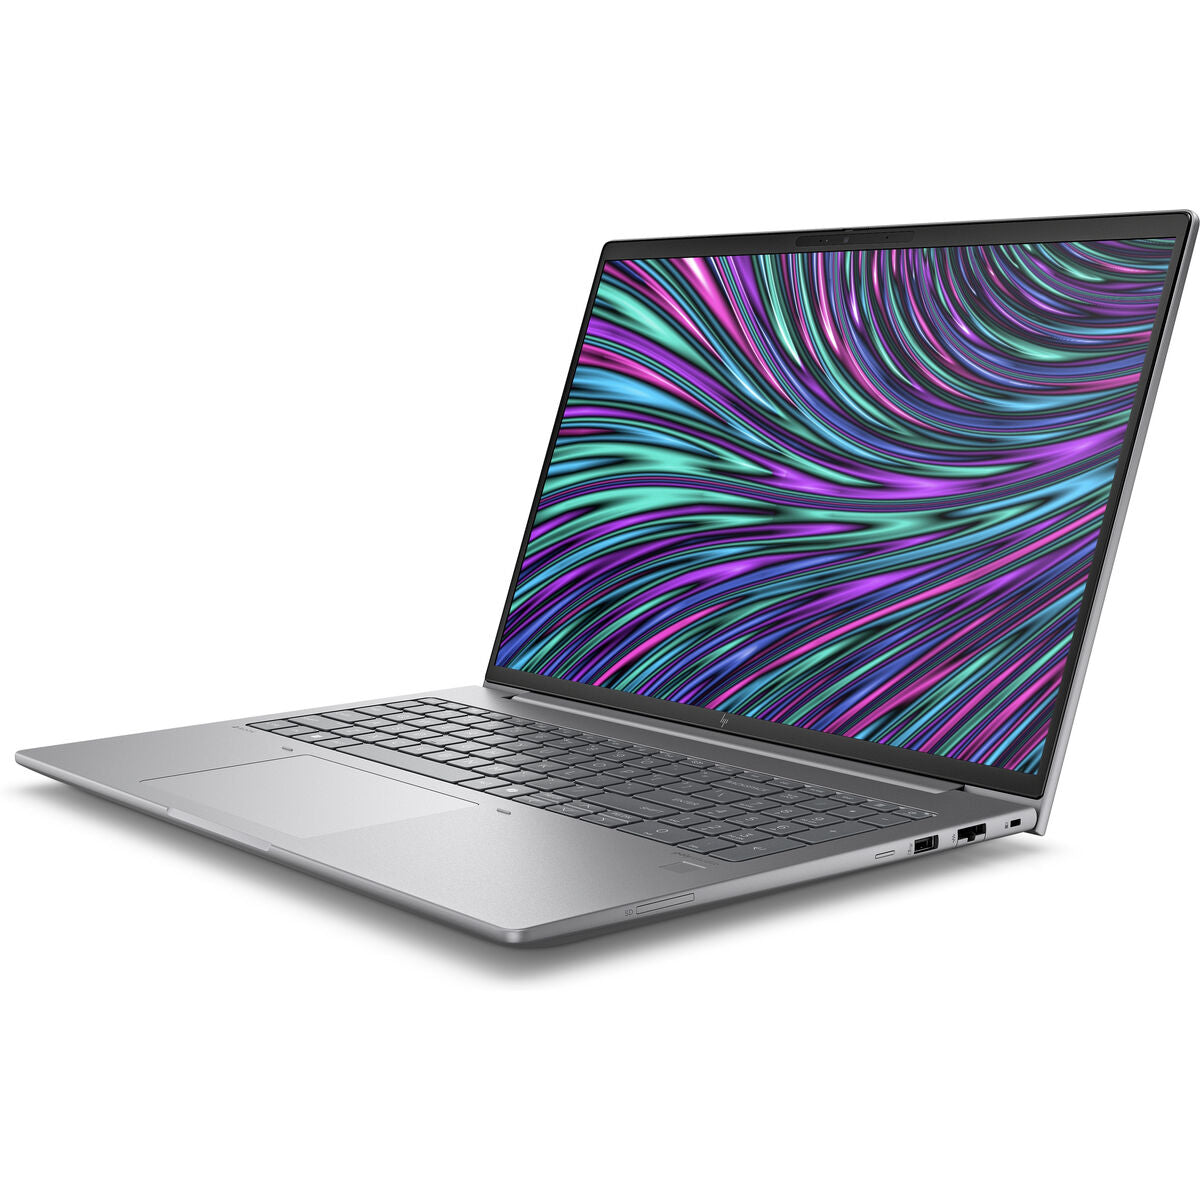 Laptop HP ZBook Power G11 16" Intel Core Ultra 7 155H 32 GB RAM 1 TB SSD Spanish Qwerty, HP, Computing, laptop-hp-zbook-power-g11-16-intel-core-ultra-7-155h-32-gb-ram-1-tb-ssd-spanish-qwerty, Brand_HP, category-reference-2609, category-reference-2791, category-reference-2797, category-reference-t-19685, category-reference-t-19904, Condition_NEW, office, Price_+ 1000, Teleworking, RiotNook